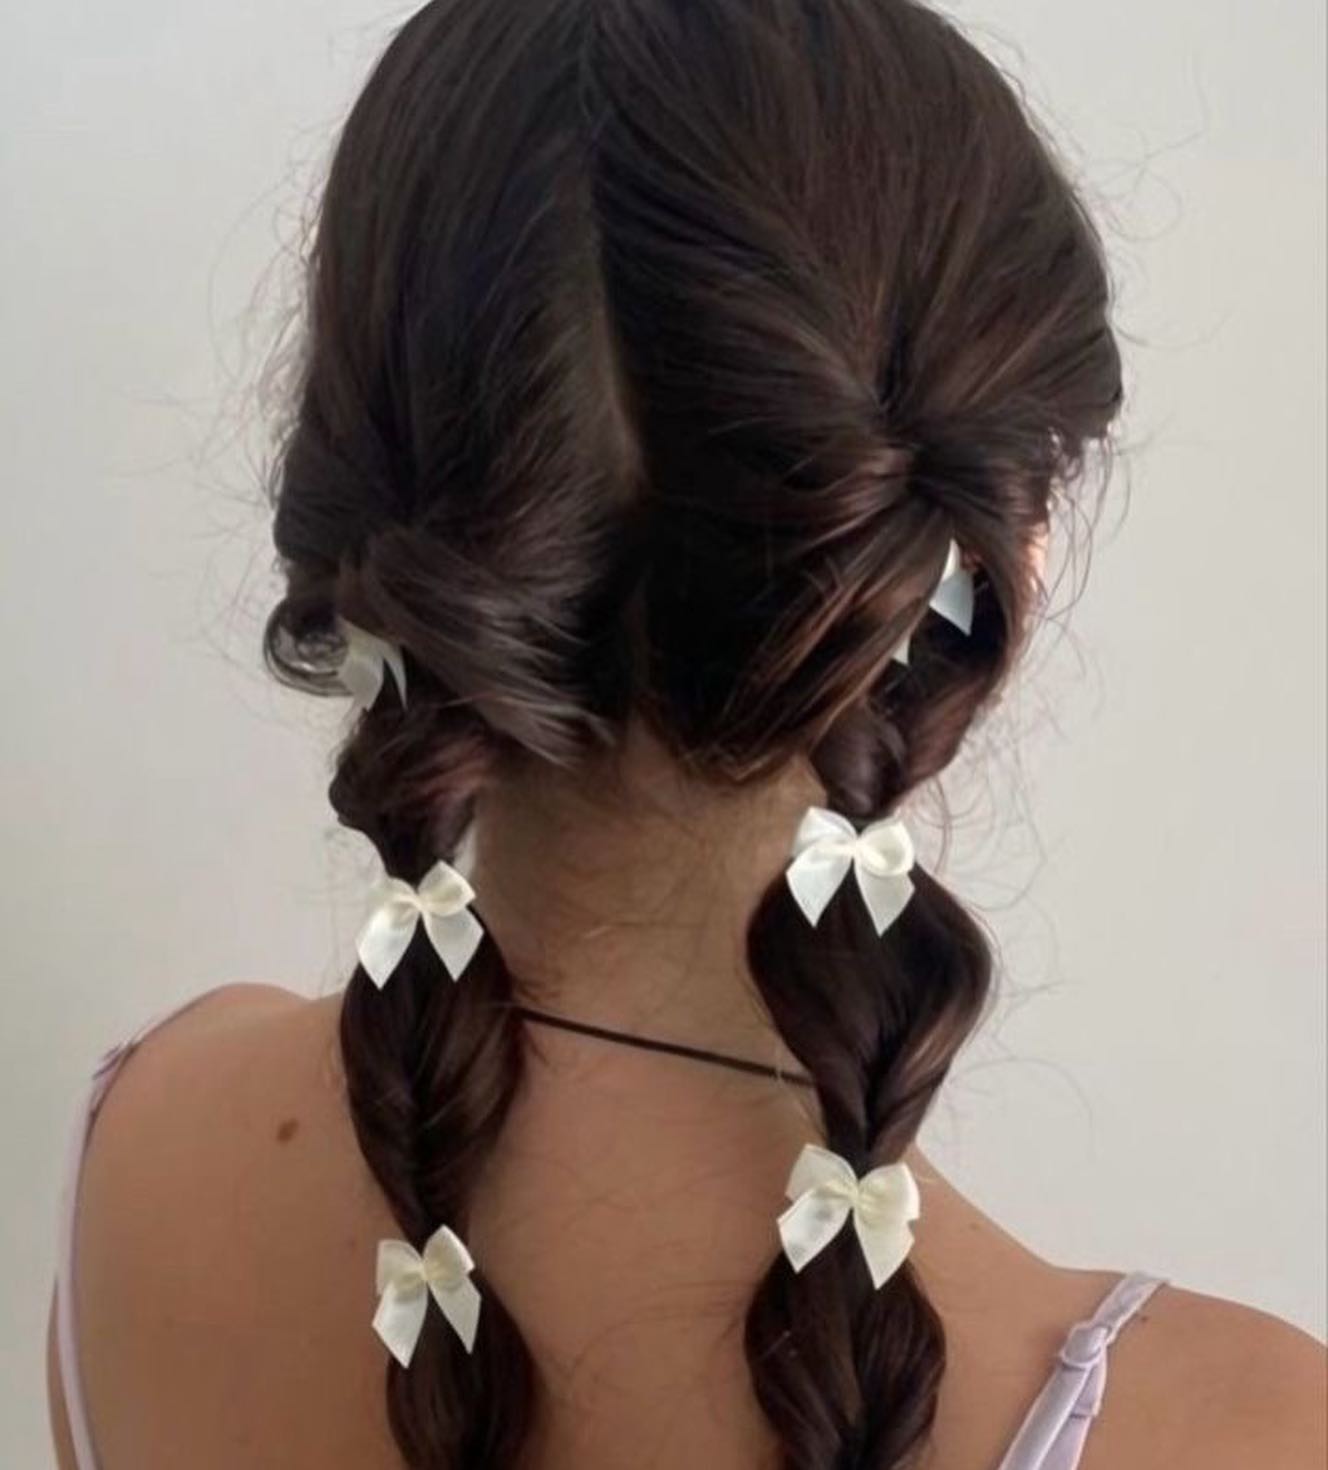 Inverted Twin Braids with Baby Bows